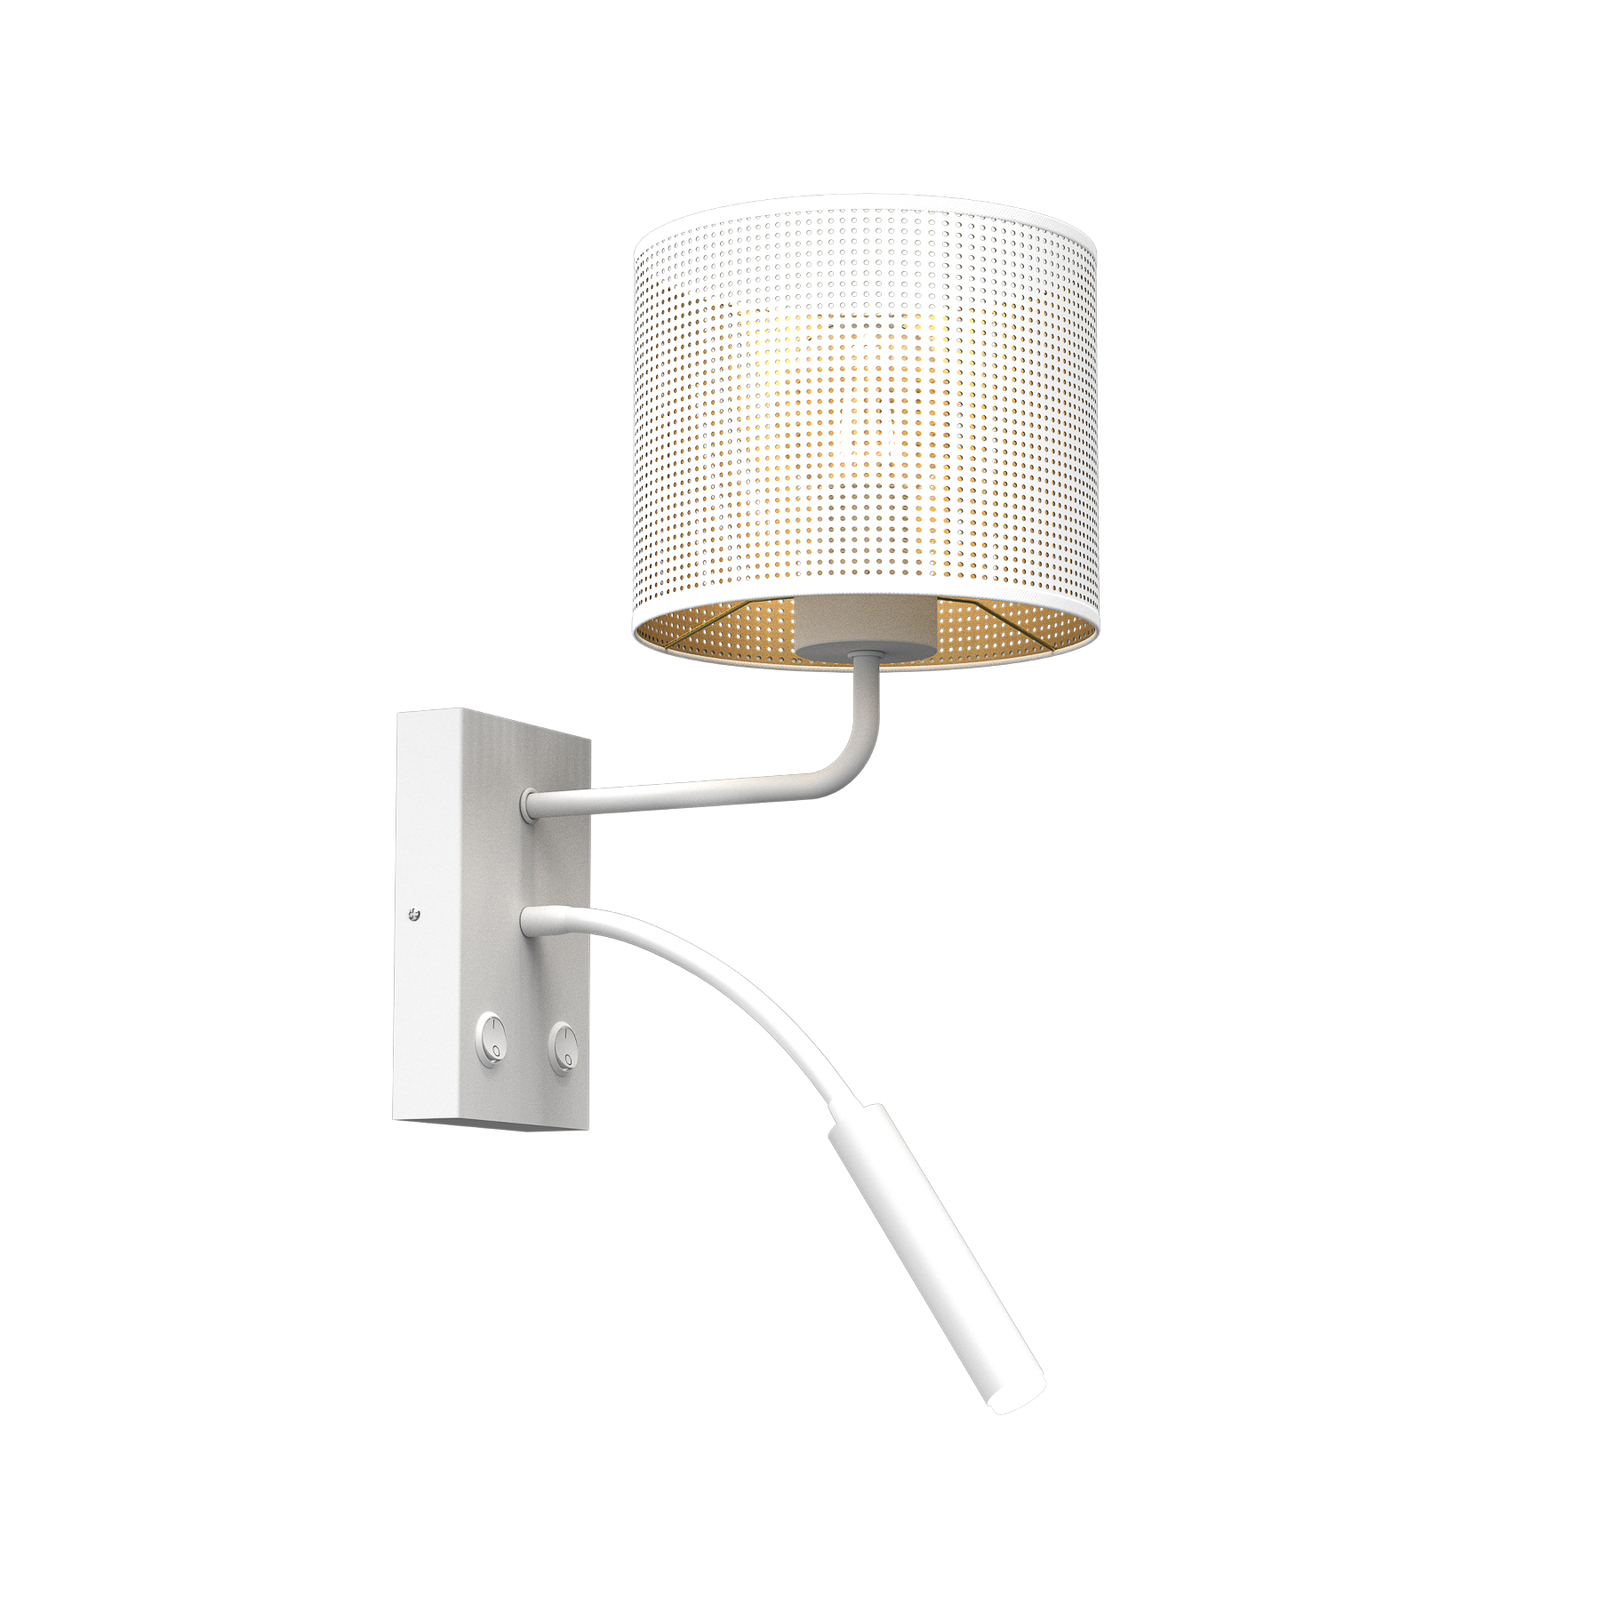 Jovin wall light one-bulb with a spot white/gold